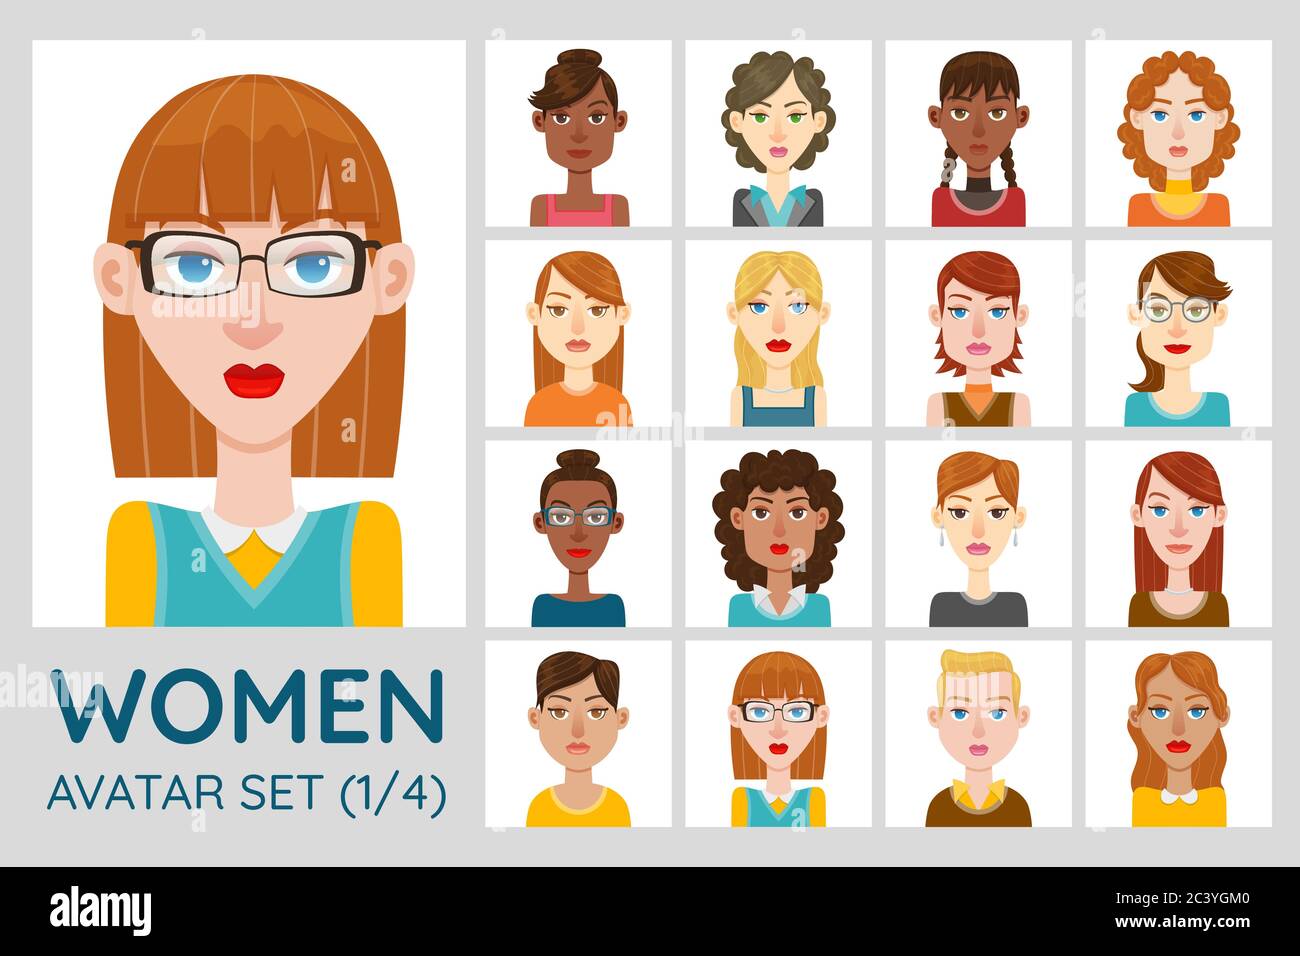 Female avatar set. Collection of 16 avatars with different hairstyles, face shapes, skin color and clothing. Set 4 of 4. Stock Vector